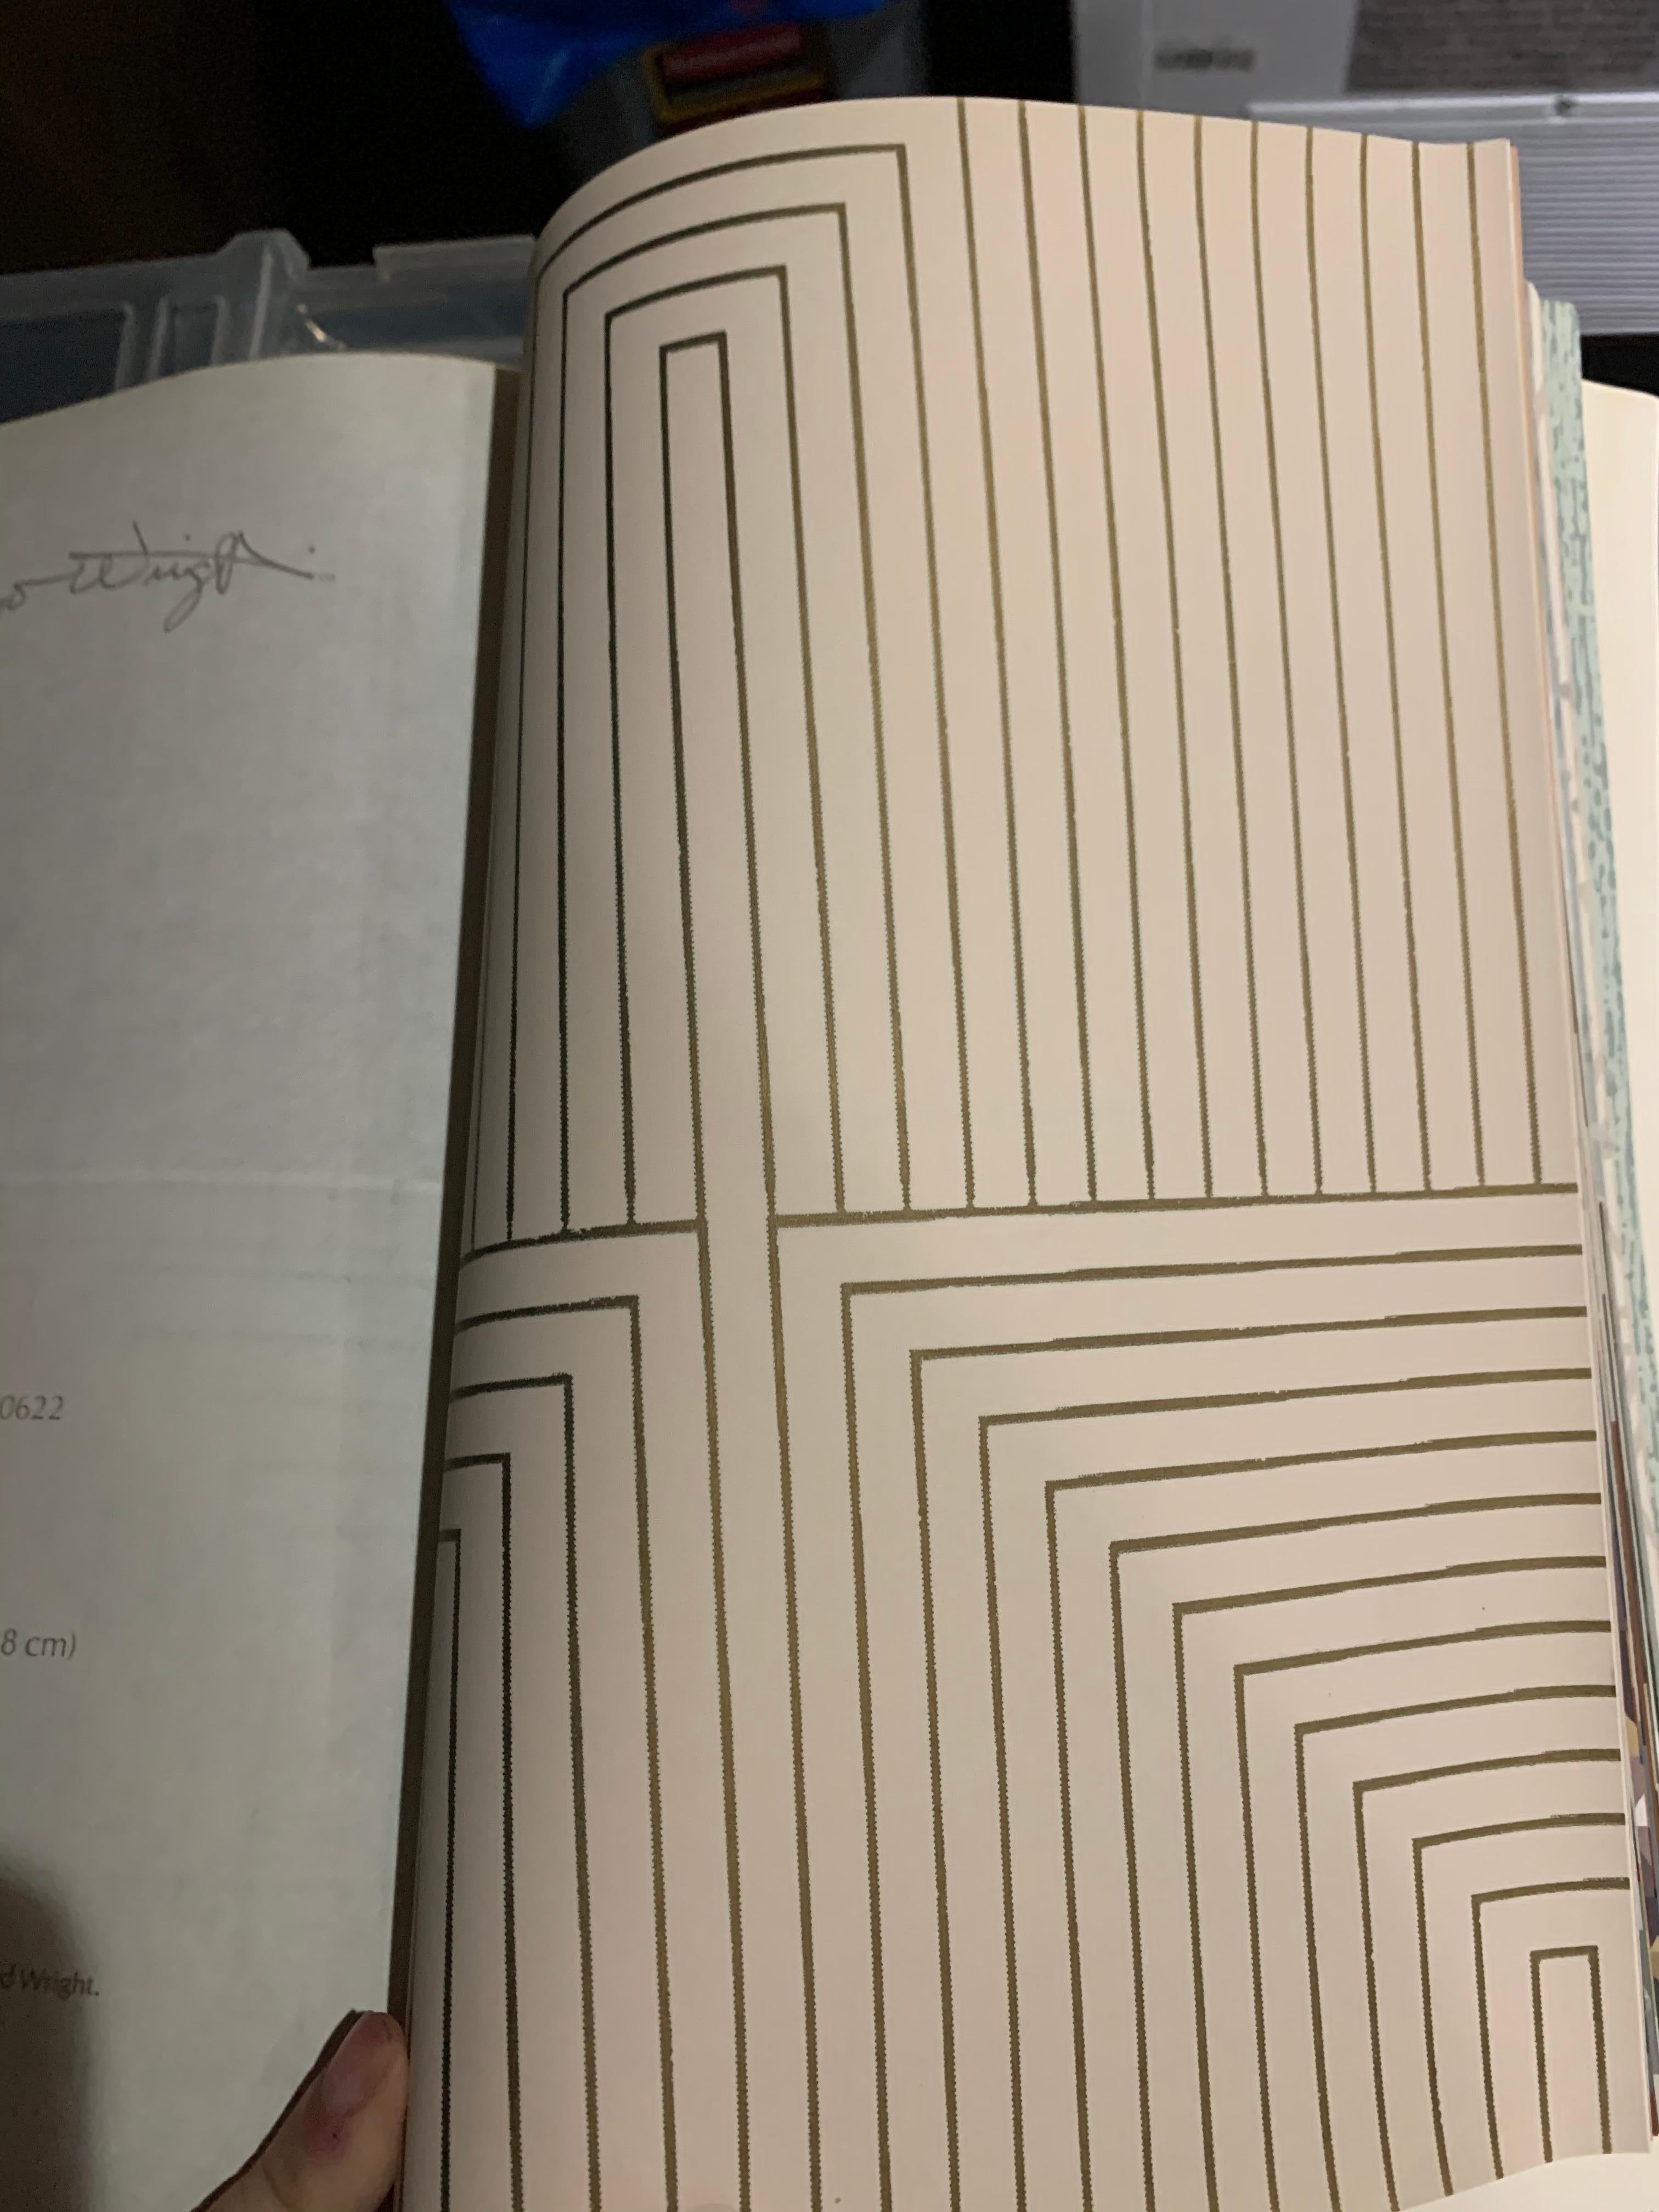 Mission Frank Lloyd Wright Schumacher Wallcoverings Wallpaper Catalogue Reference, 1986 For Sale